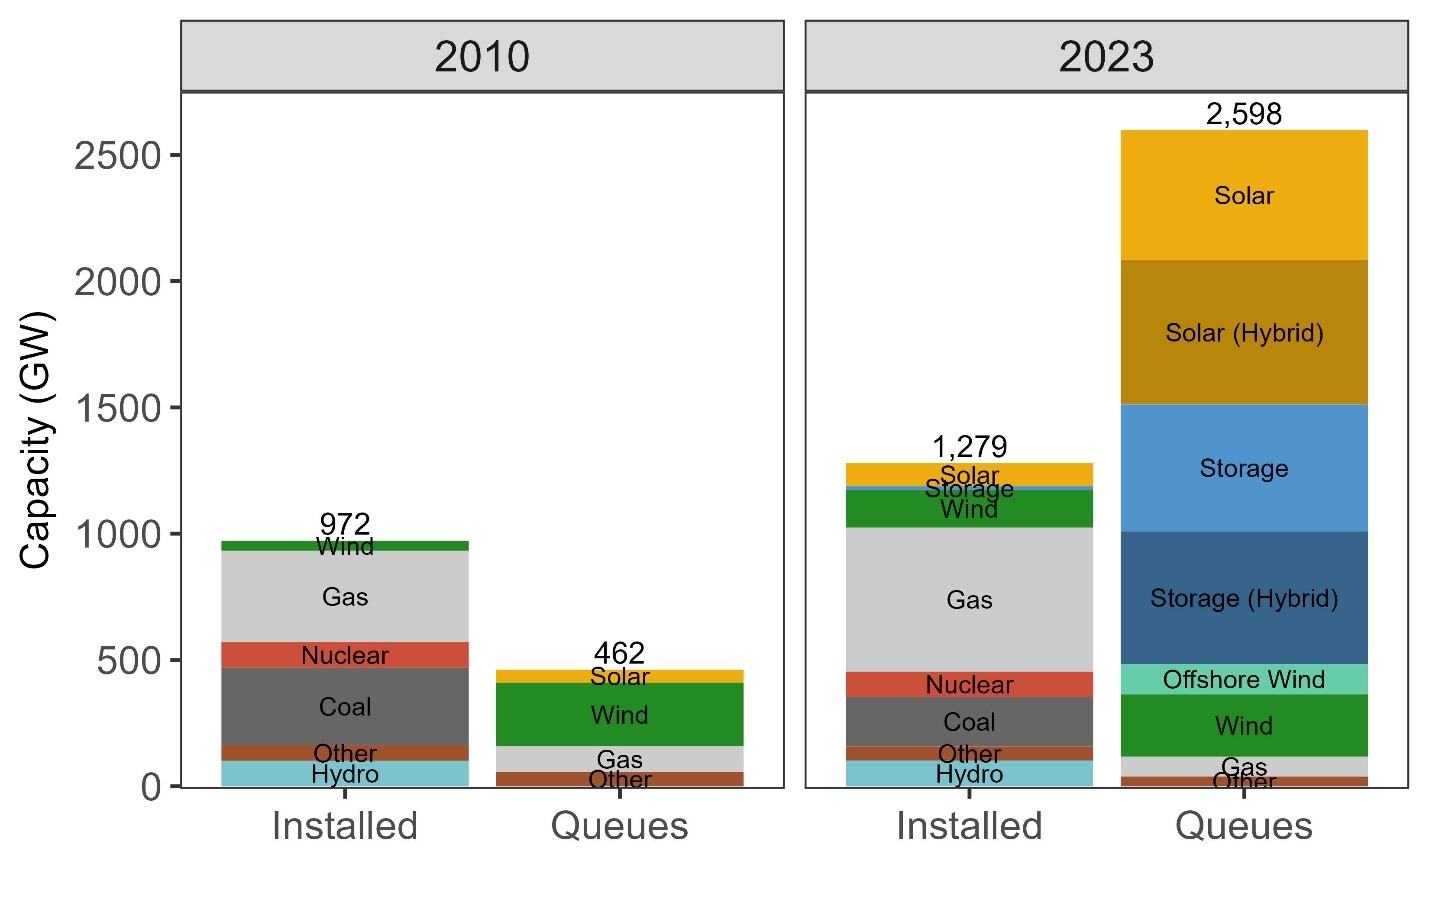 Figure 1: Installed U.S. electric generating capacity compared to interconnection queue capacity (2010 and 2023)